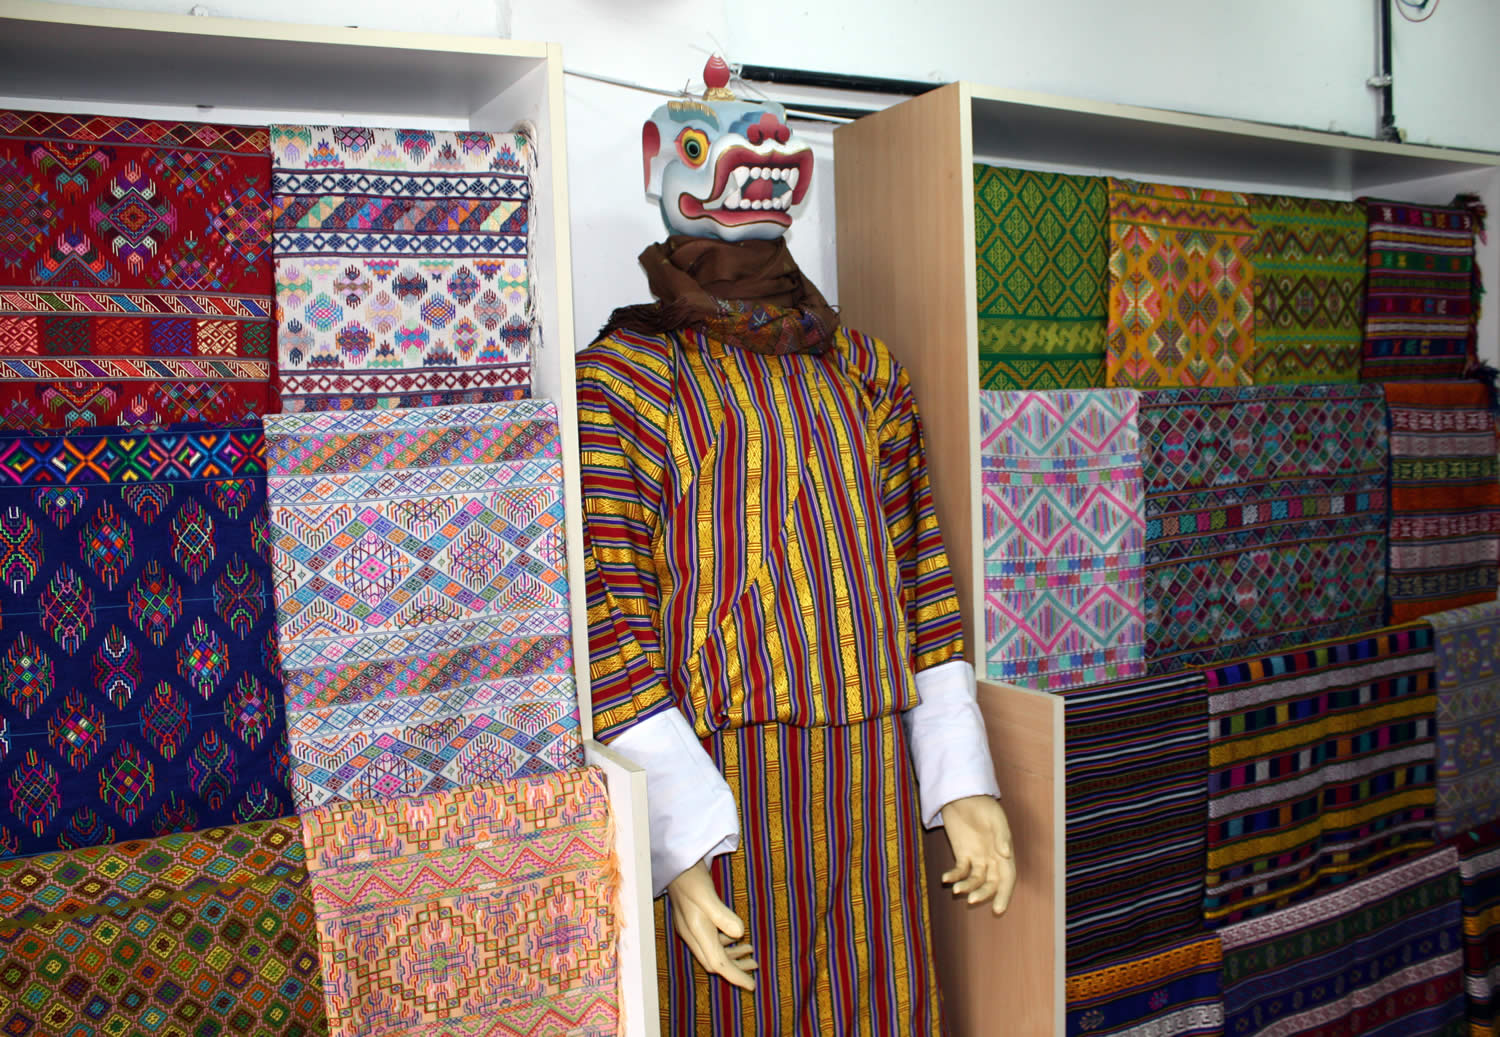 More Bhutanese textiles on display in Thimphu.